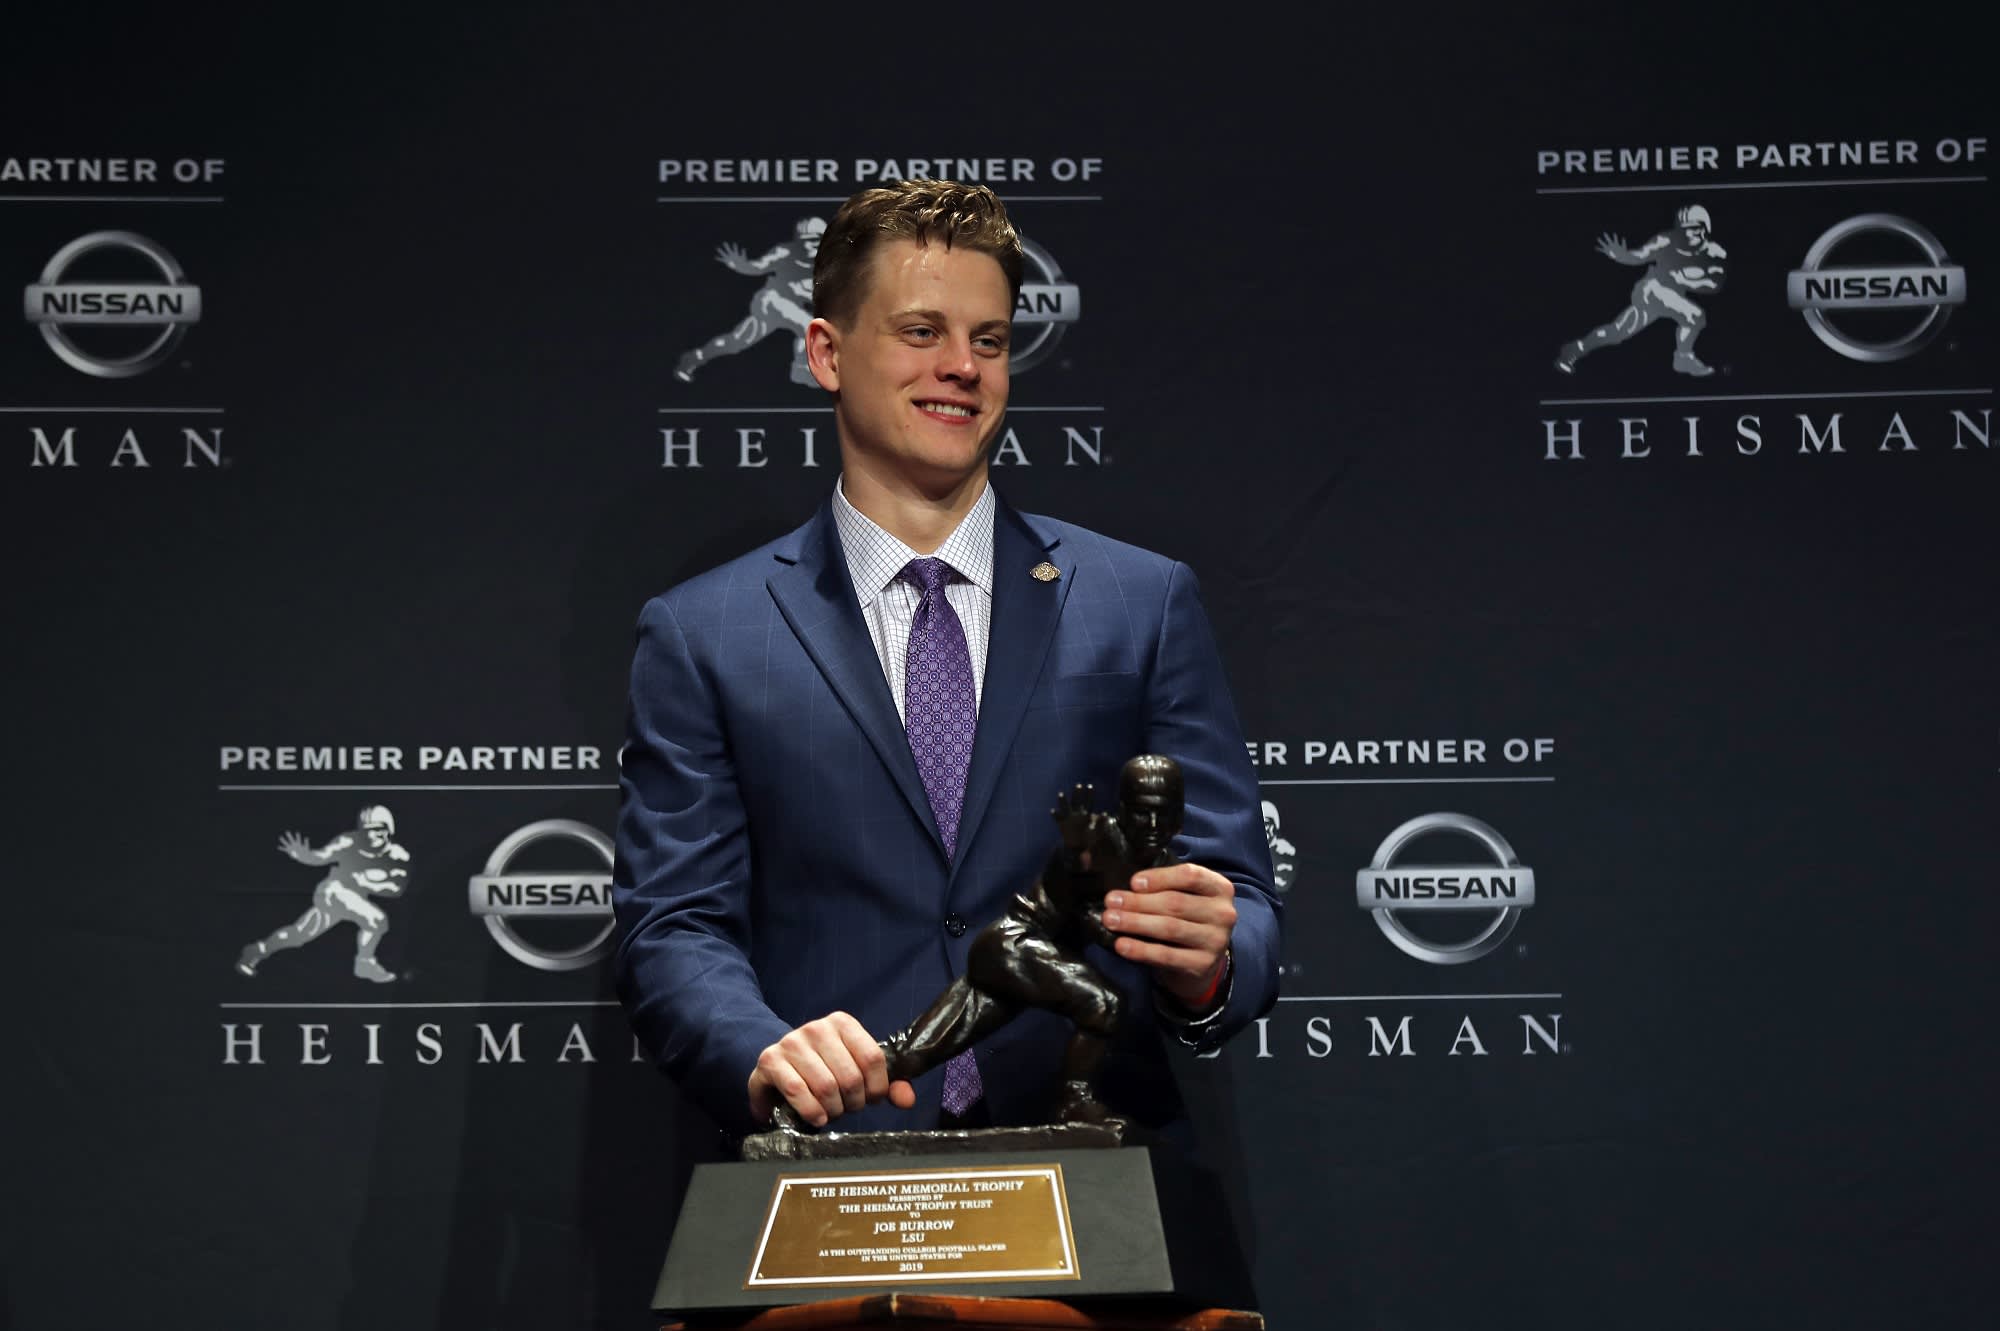 Joe Burrow's Latest Contract Extension Makes Him the Highest-Paid